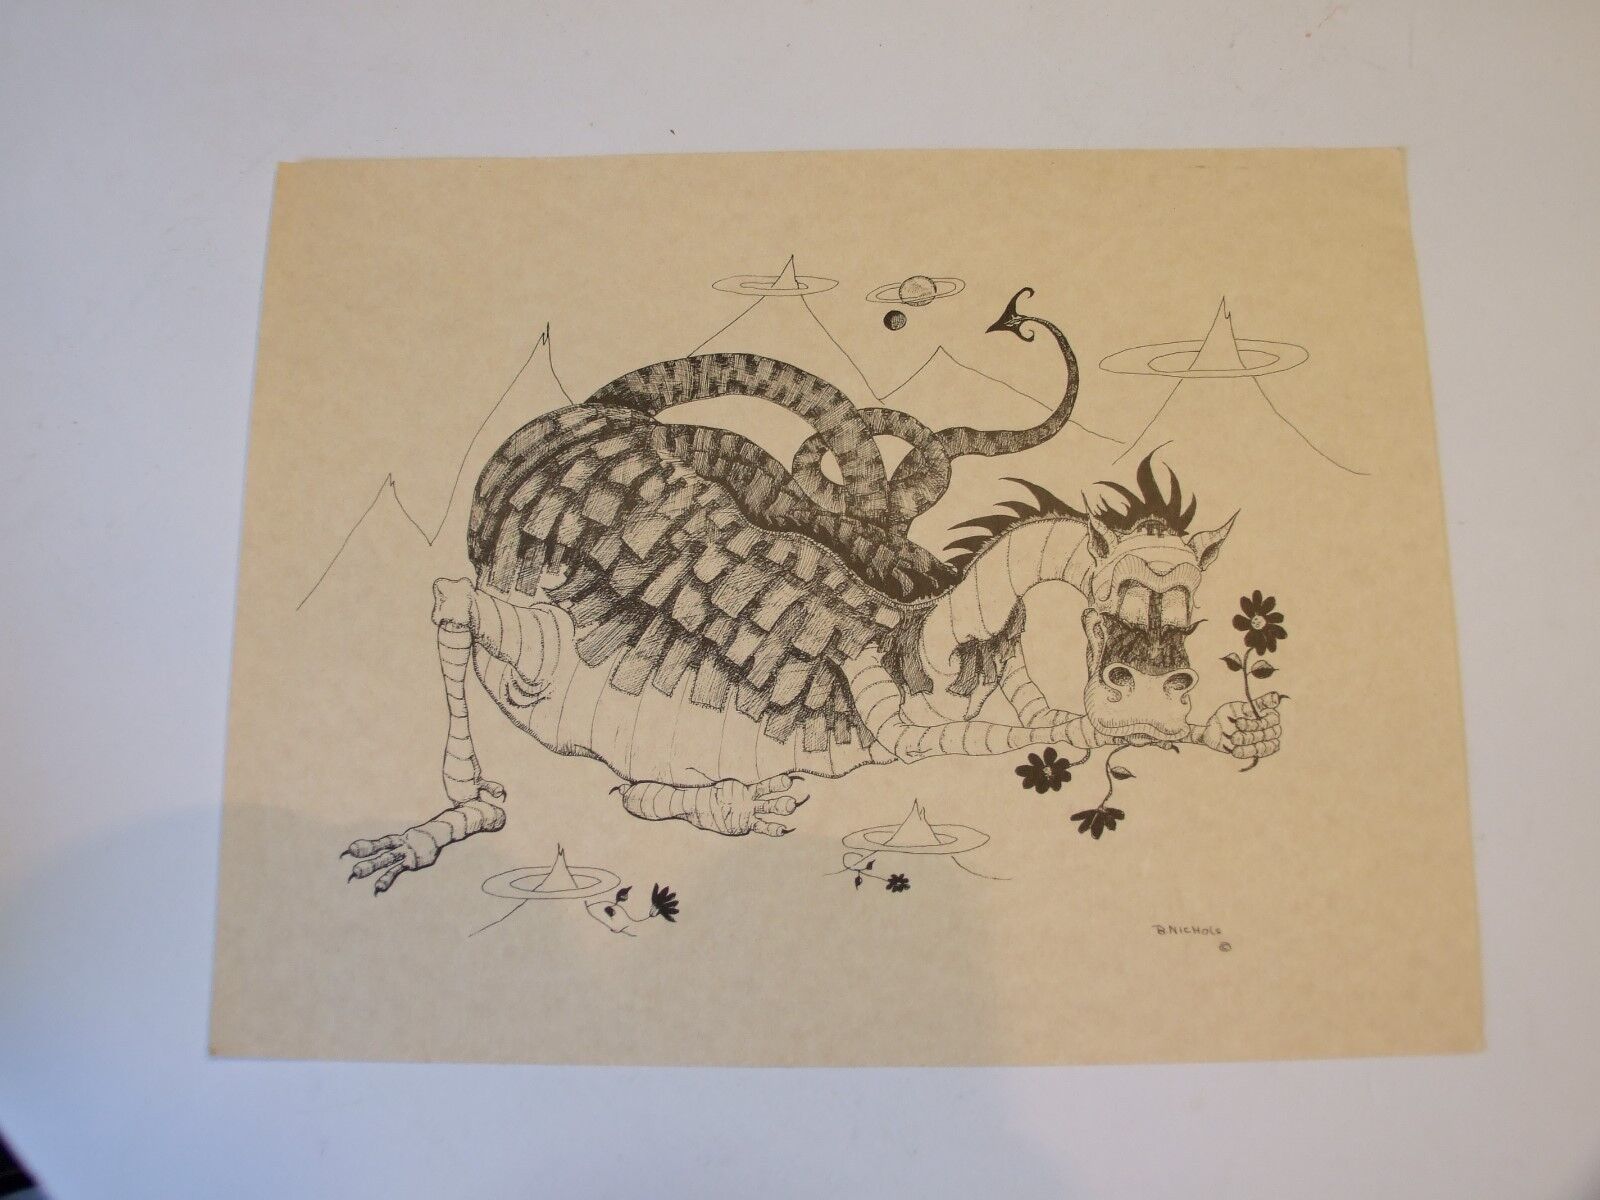 Collectible Lithiograph On Parchment Of A Dragon By B. Nichols 8 1/2"x11" Print